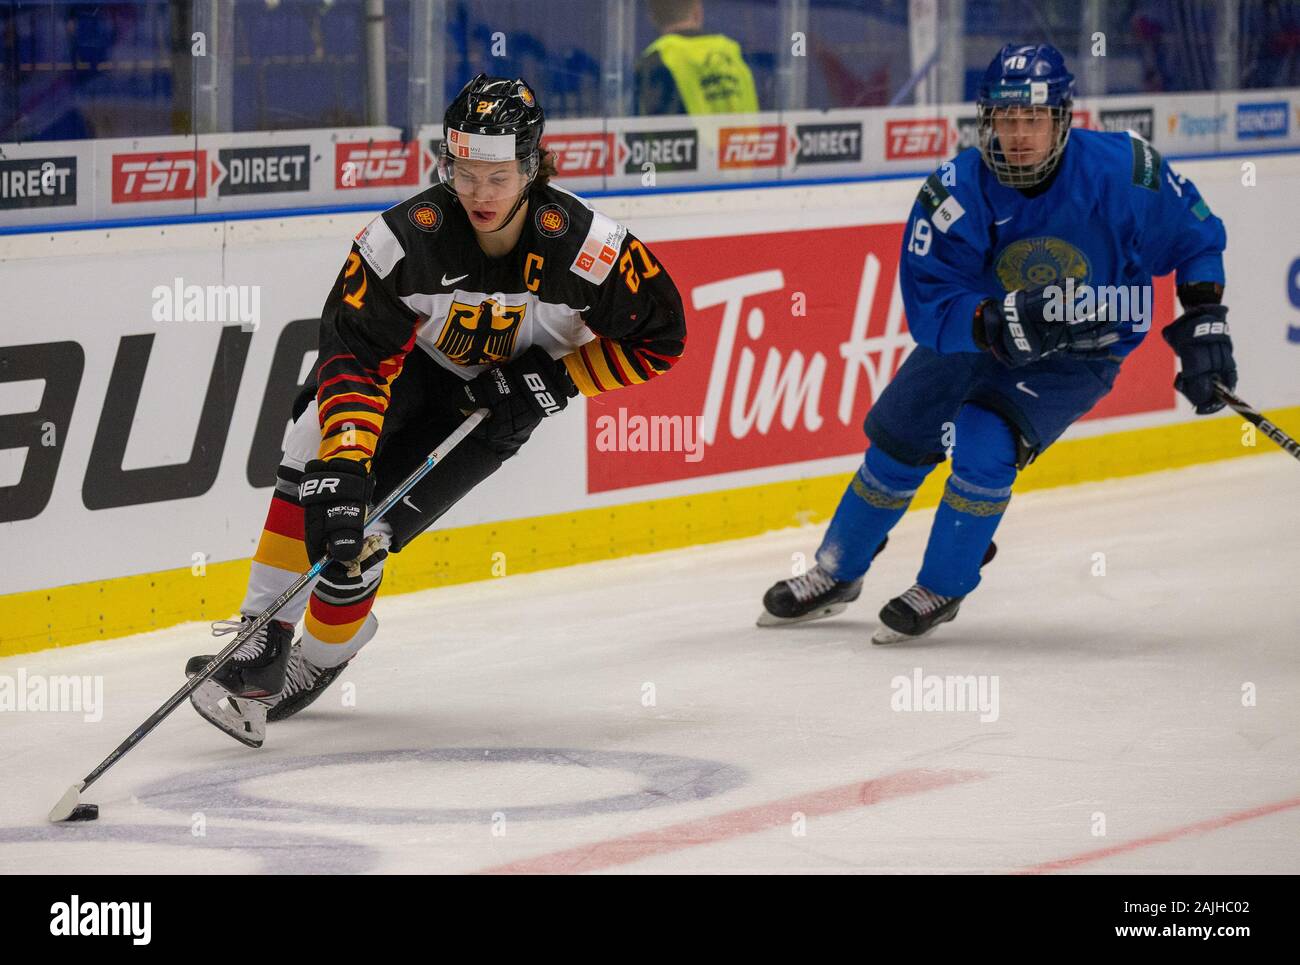 Moritz Seider: NHL rookie of the year made in Germany – DW – 06/22